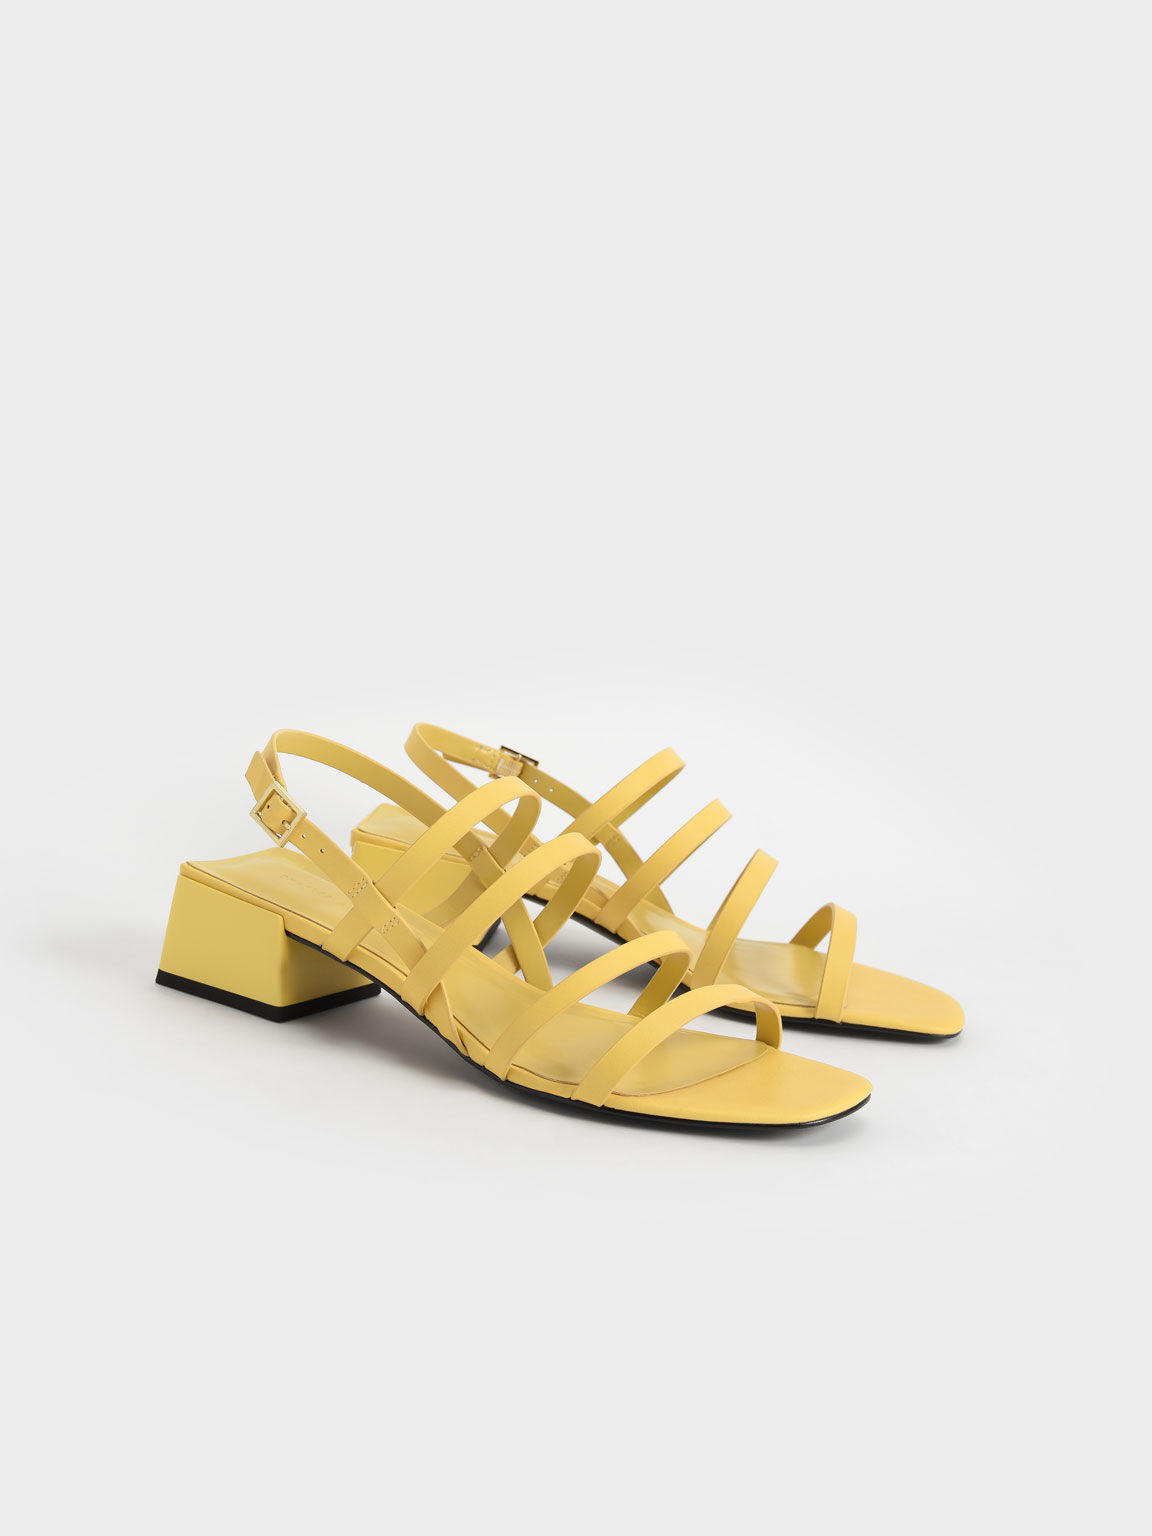 Strappy Geometric Slingback Sandals, Yellow, hi-res